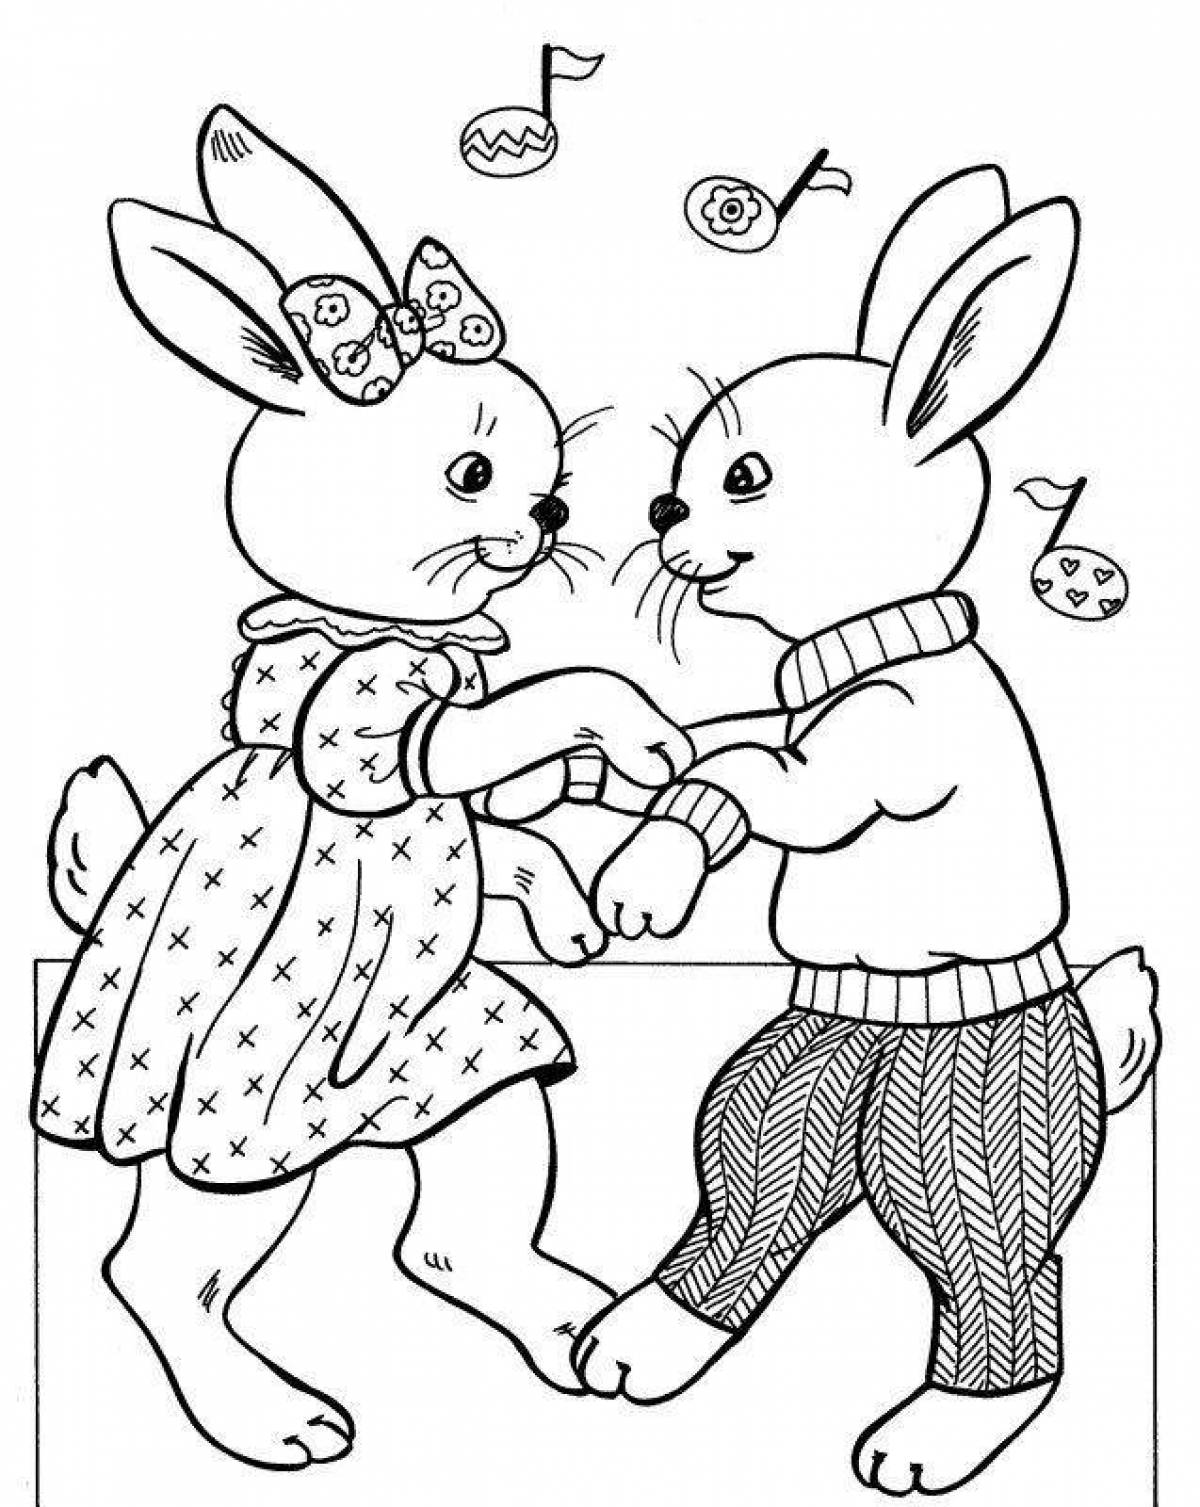 Sparkling rabbit coloring page